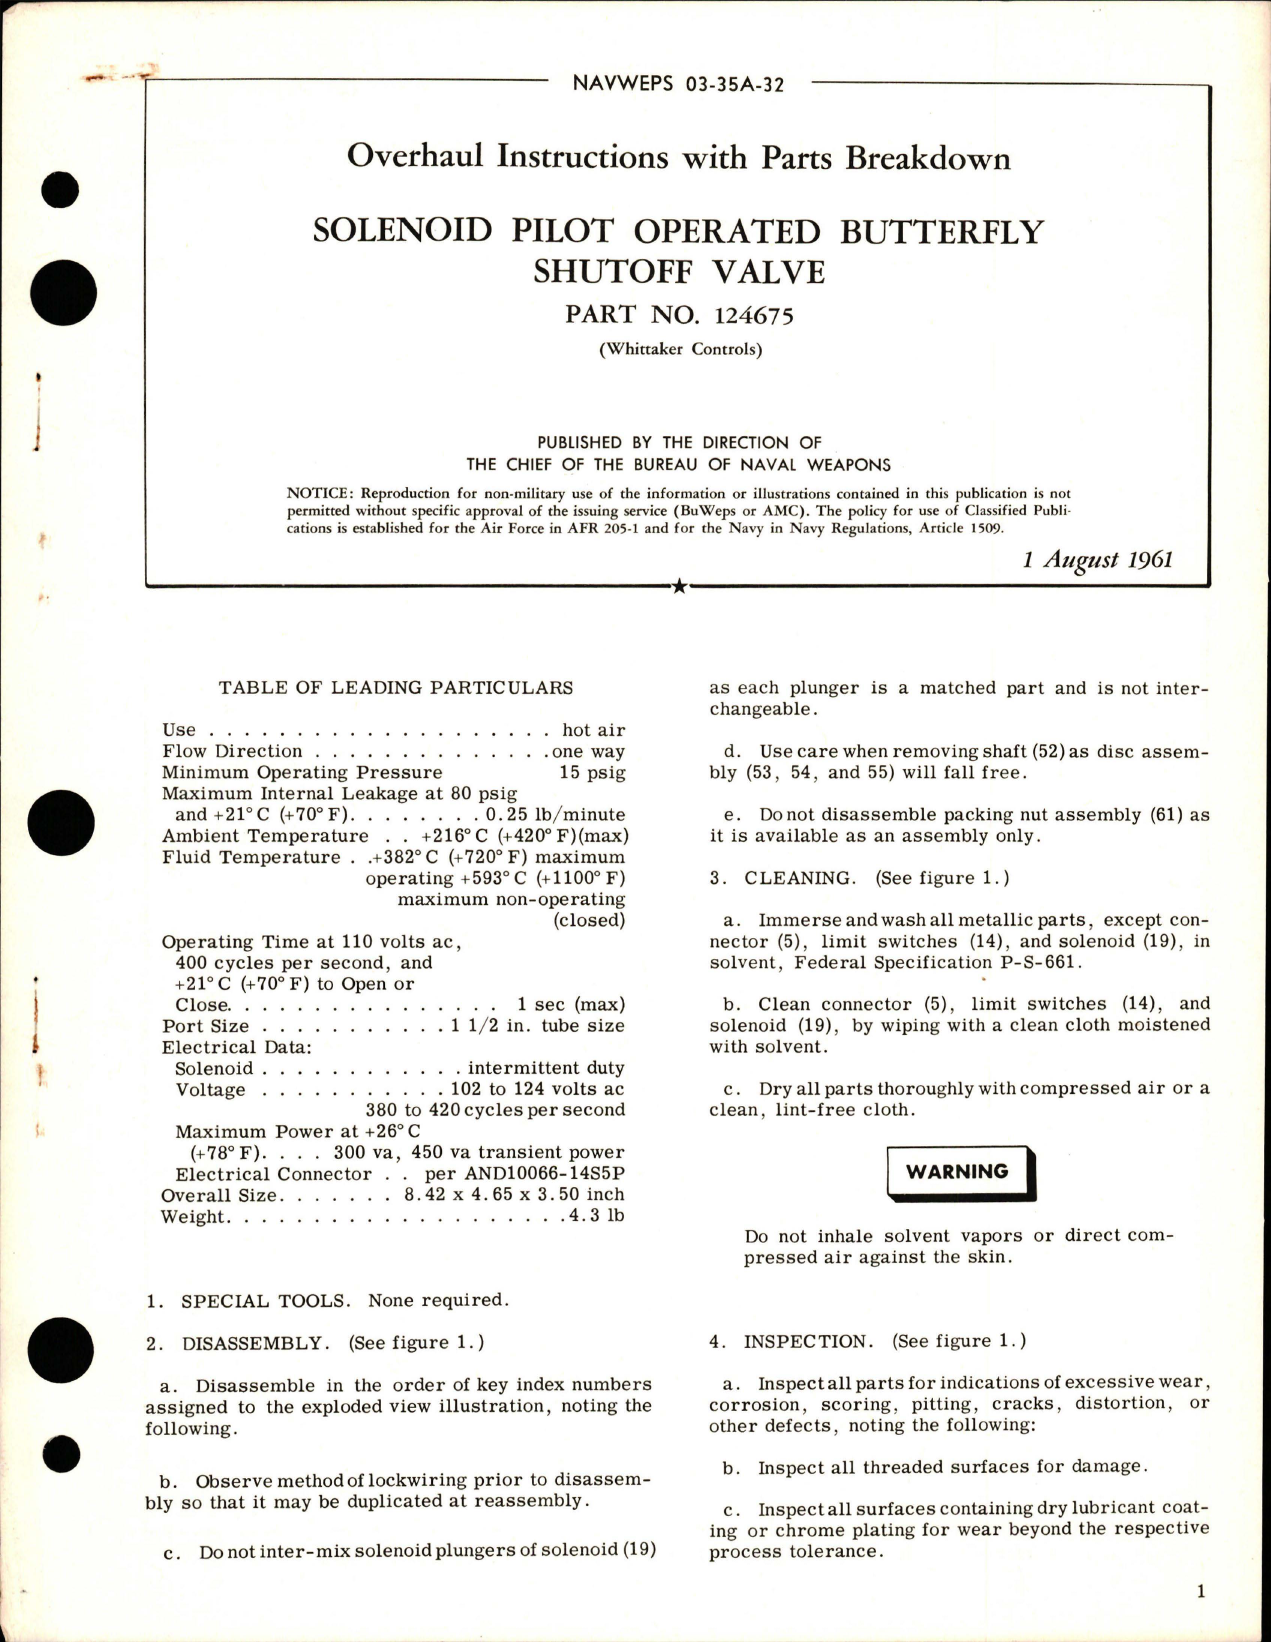 Sample page 1 from AirCorps Library document: Overhaul Instructions with Parts Breakdown for Solenoid Pilot Operated Butterfly Shutoff Valve - Part 124675